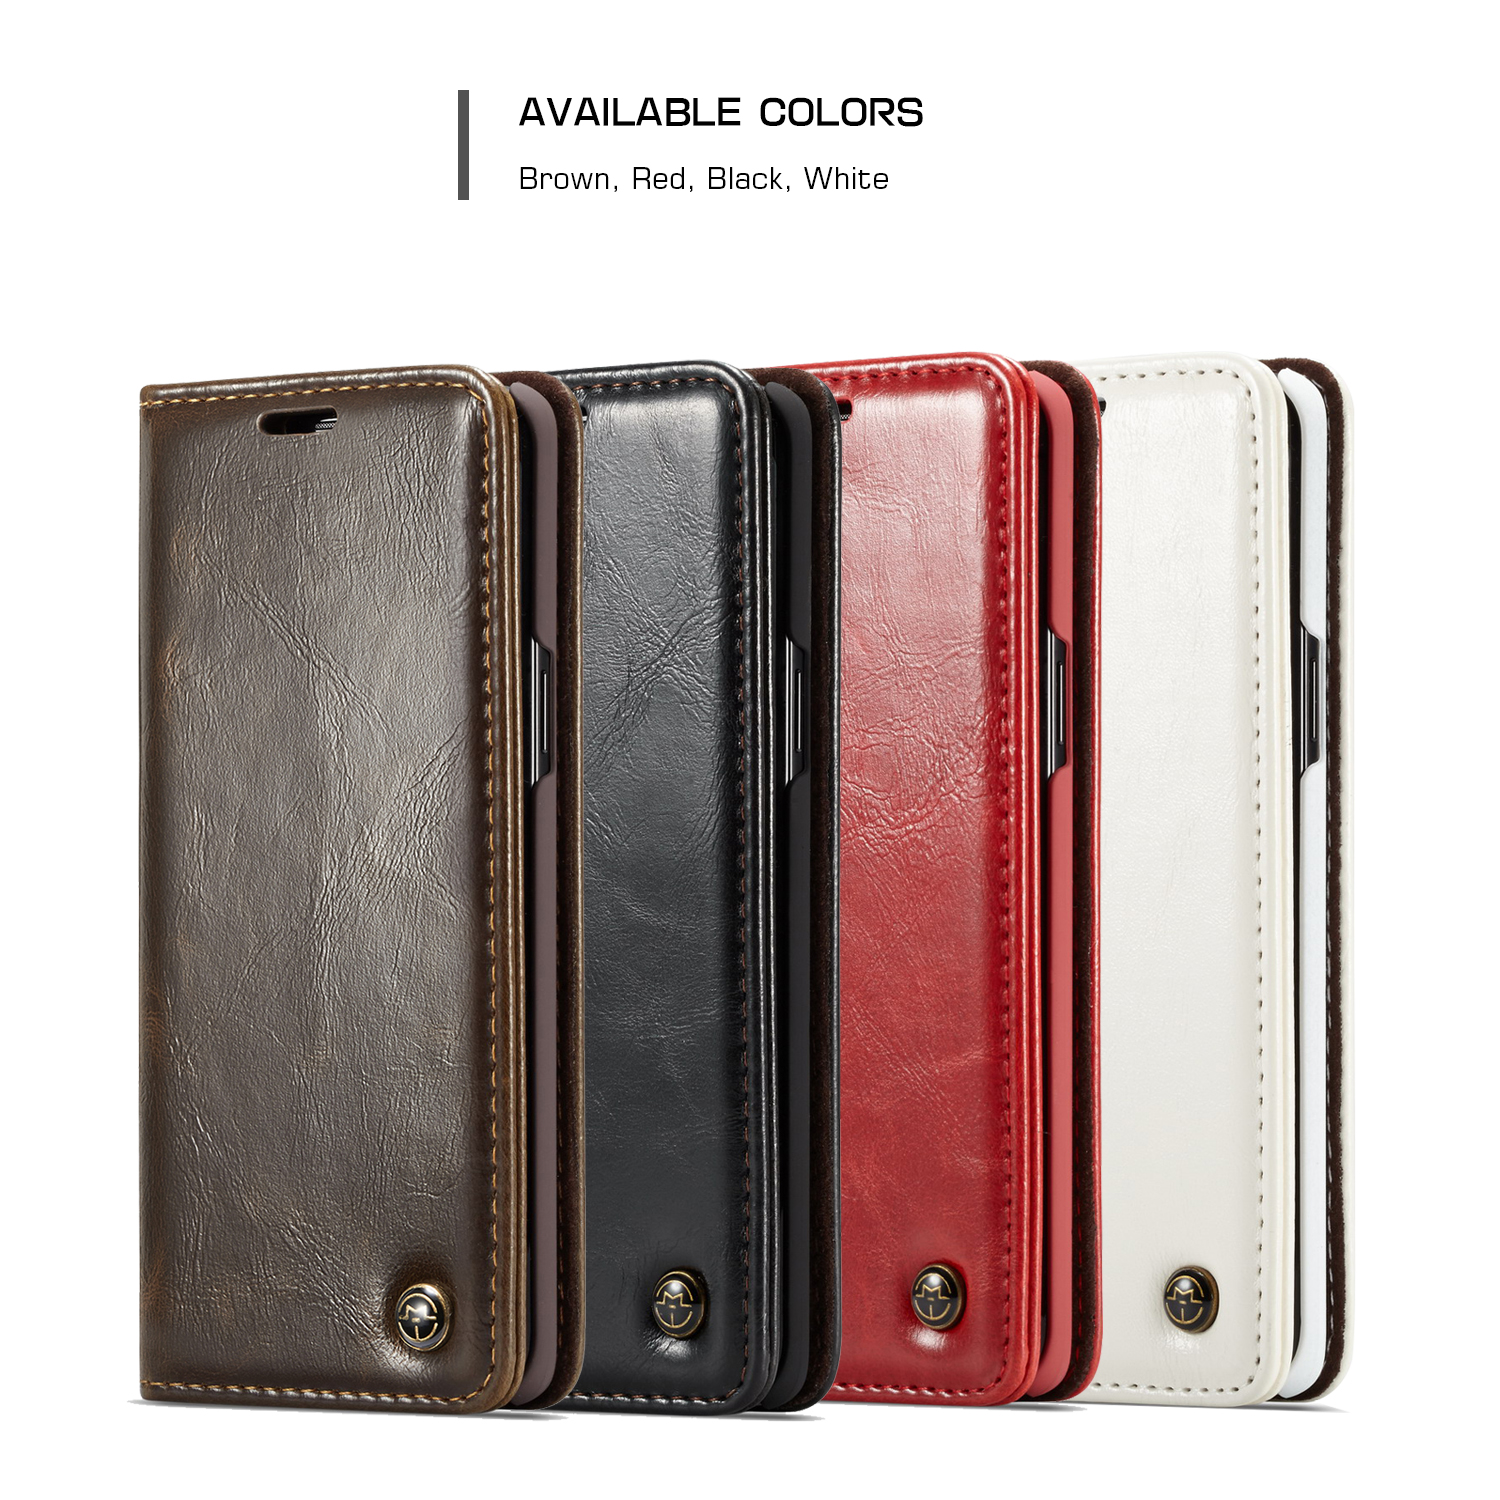 Caseme-Wallet-Kickstand-Protective-Case-For-Samsung-Galaxy-S9-Magnetic-Flip-Card-Slots-1291821-5